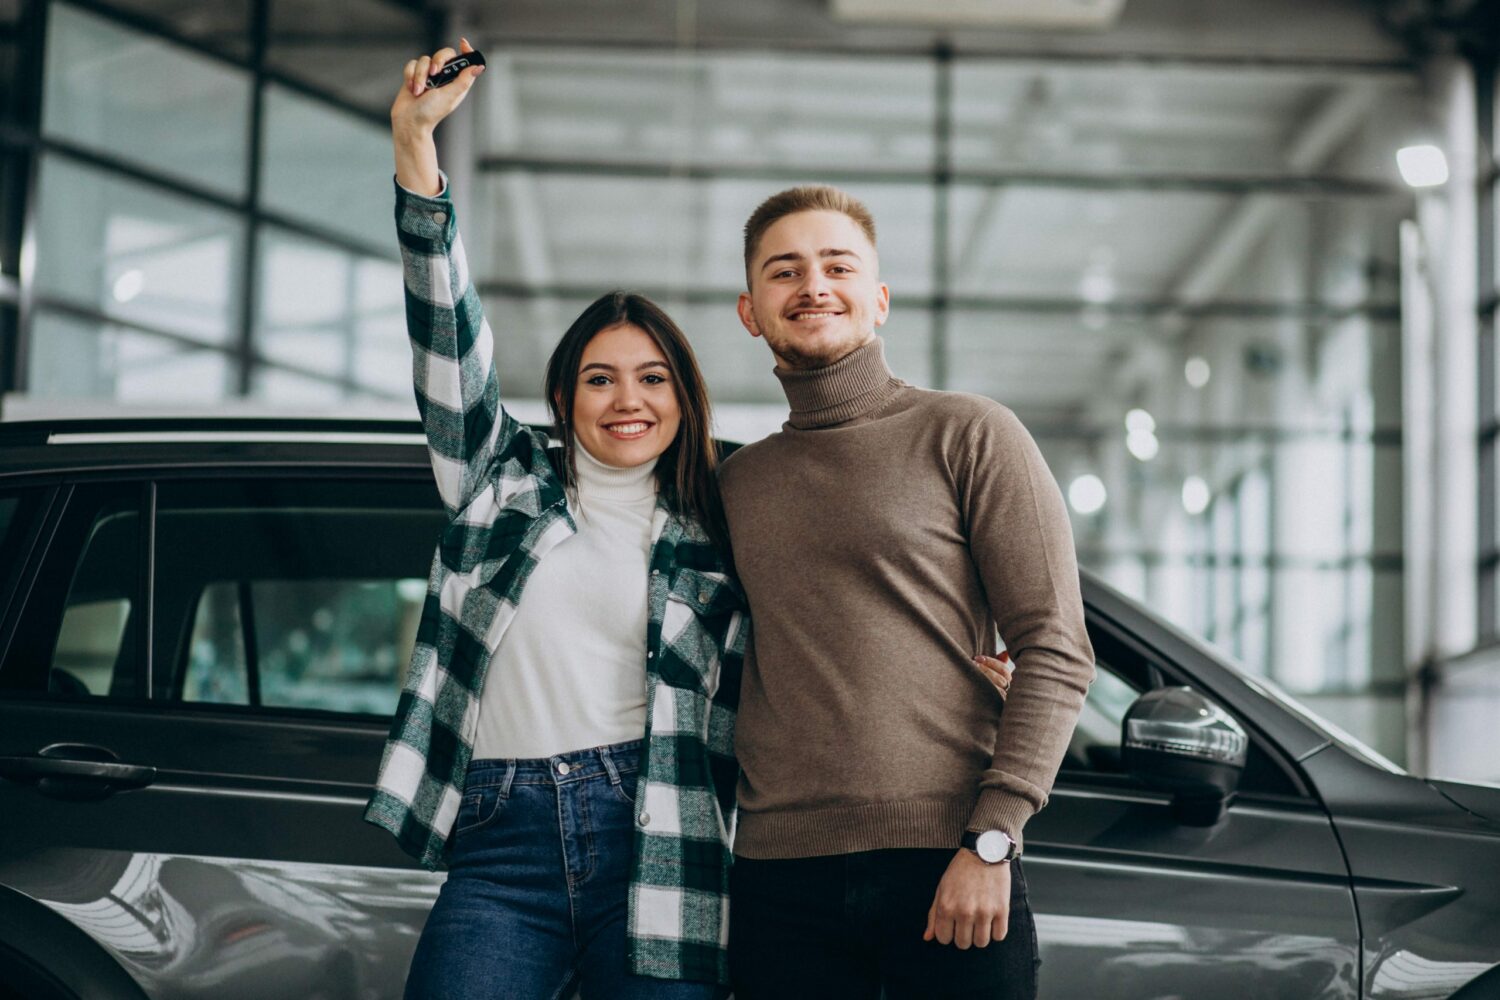 Car shopping doesn't have to be stressful. With the right approach, you can help turn it into a fun, engaging, and empowering experience.